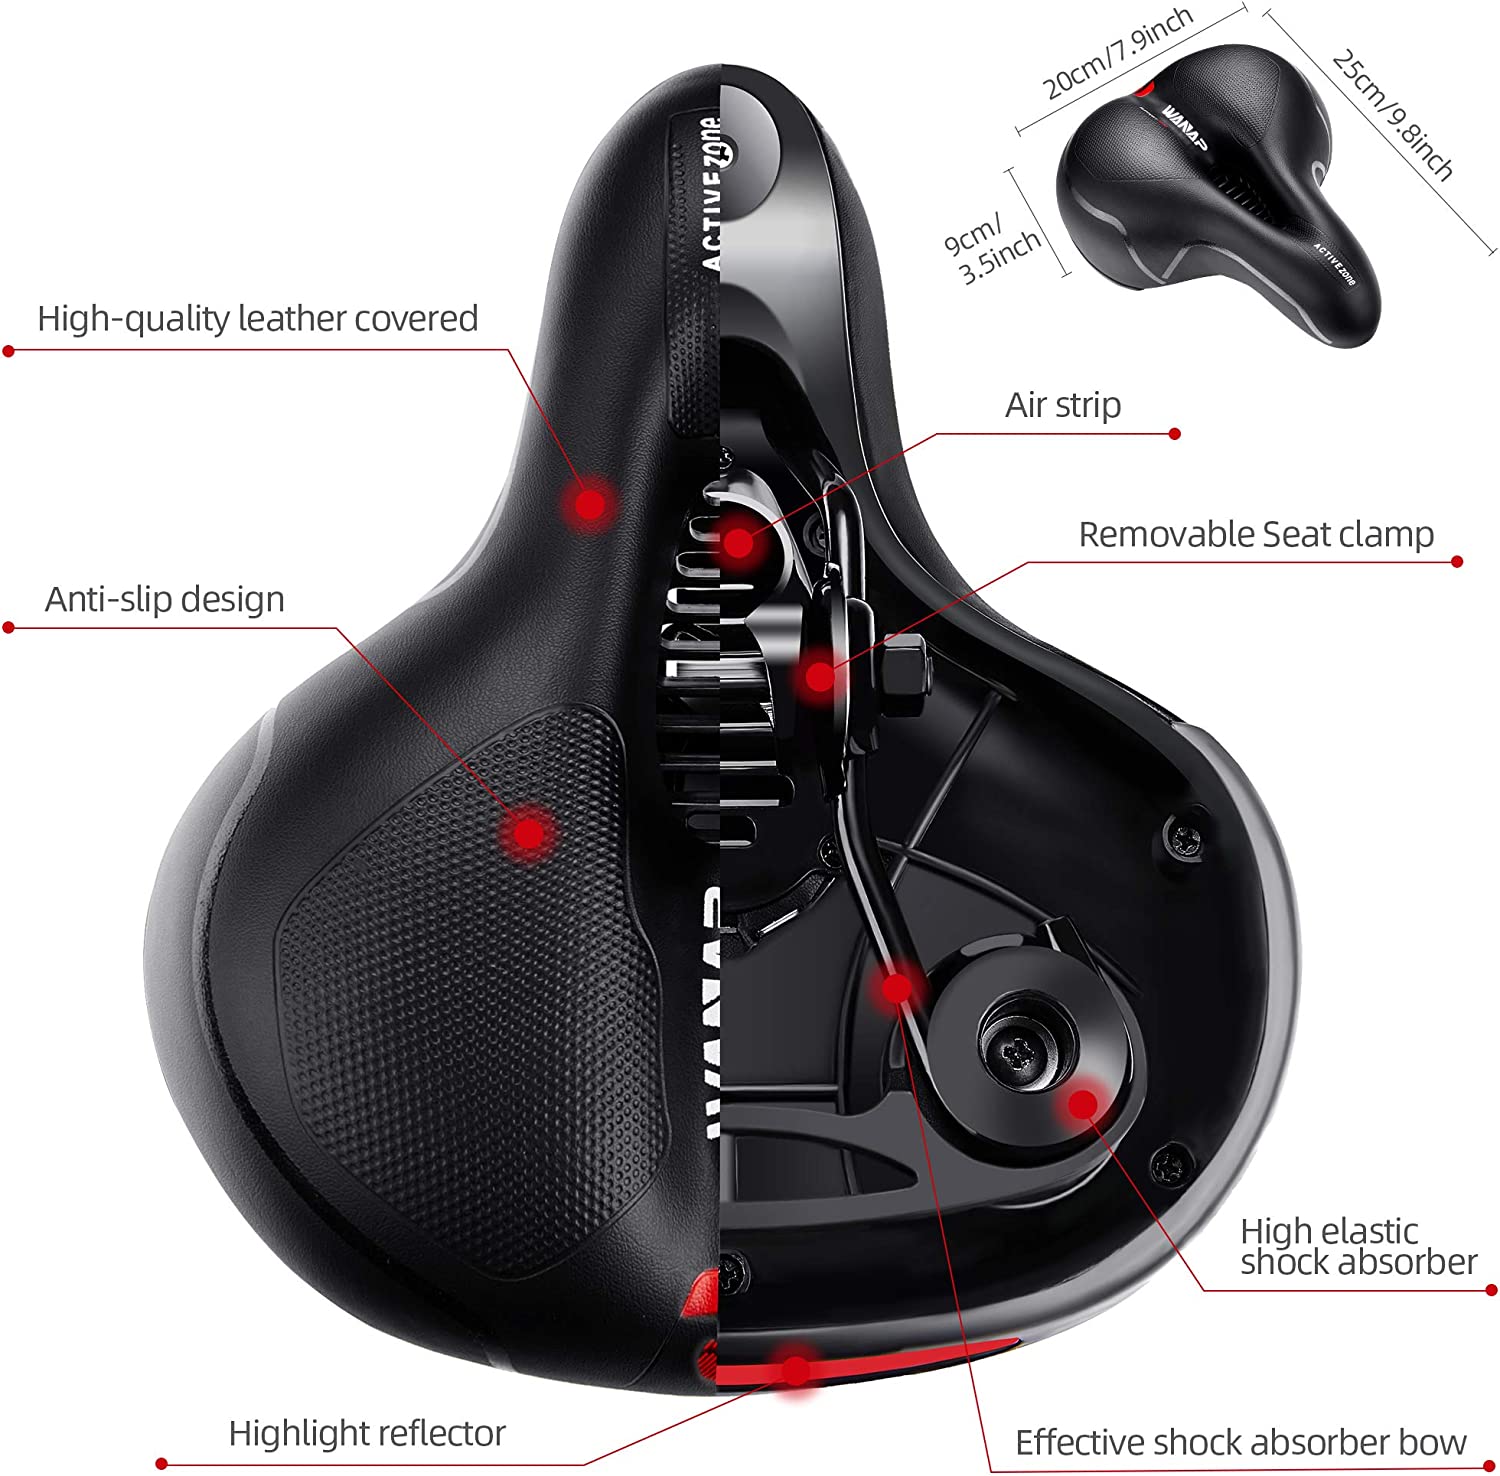 Bike Saddle, BUSATIA Bike Seat Men Women Gel Seat Cushion for Bike, Comfortable Wide 9.8 x 7.9 x 3.5in Thickness Soft Bicycle Seat, Black Waterproof for City Mountain Bike MTB, with Installation Tools - image 2 of 7